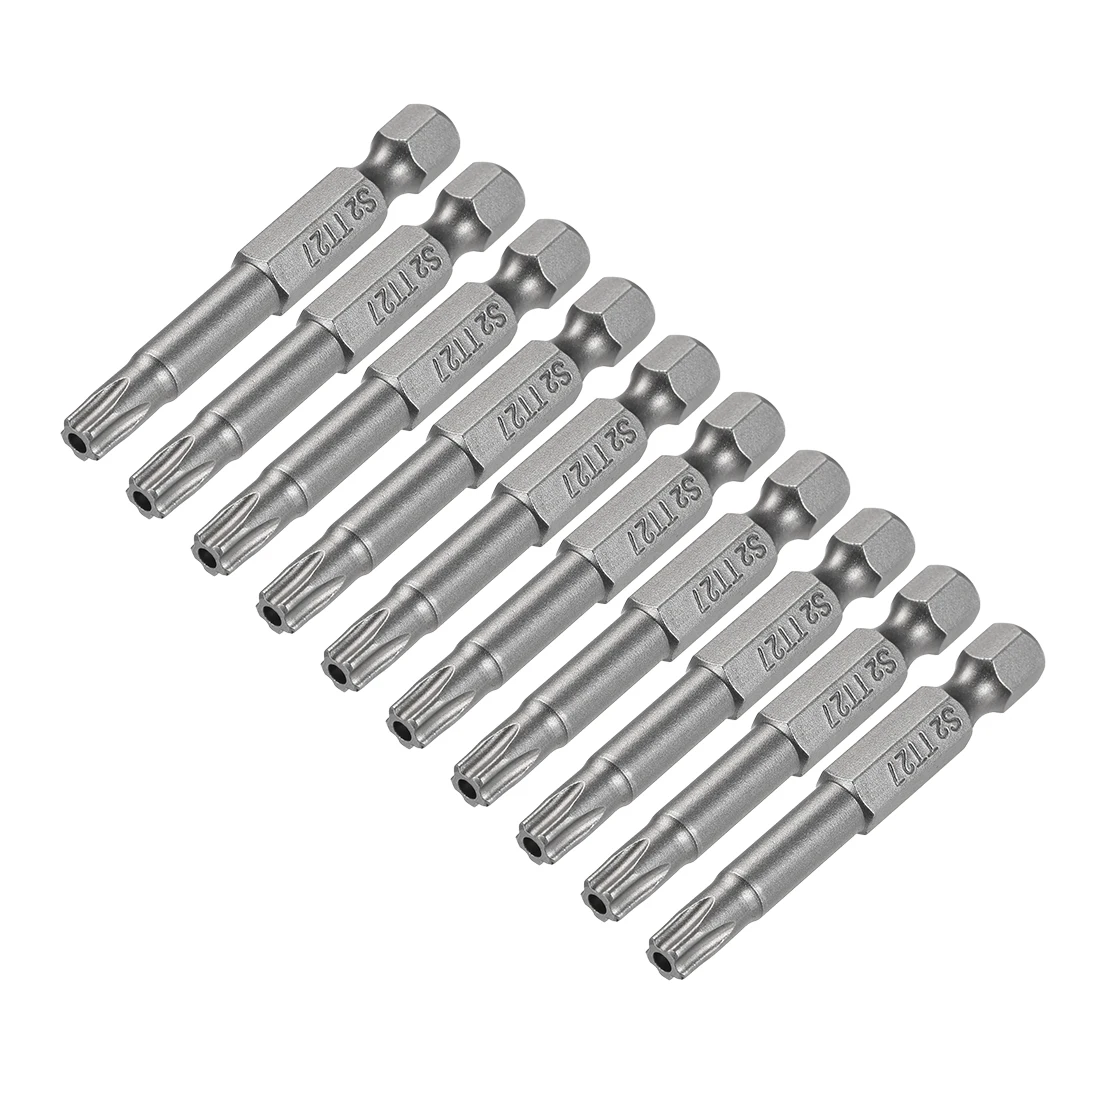 

Uxcell 50mm Long 1/4inch Hex Shank T27 Torx Security Star Screwdriver Bits S2 High Alloy Steel 10pcs